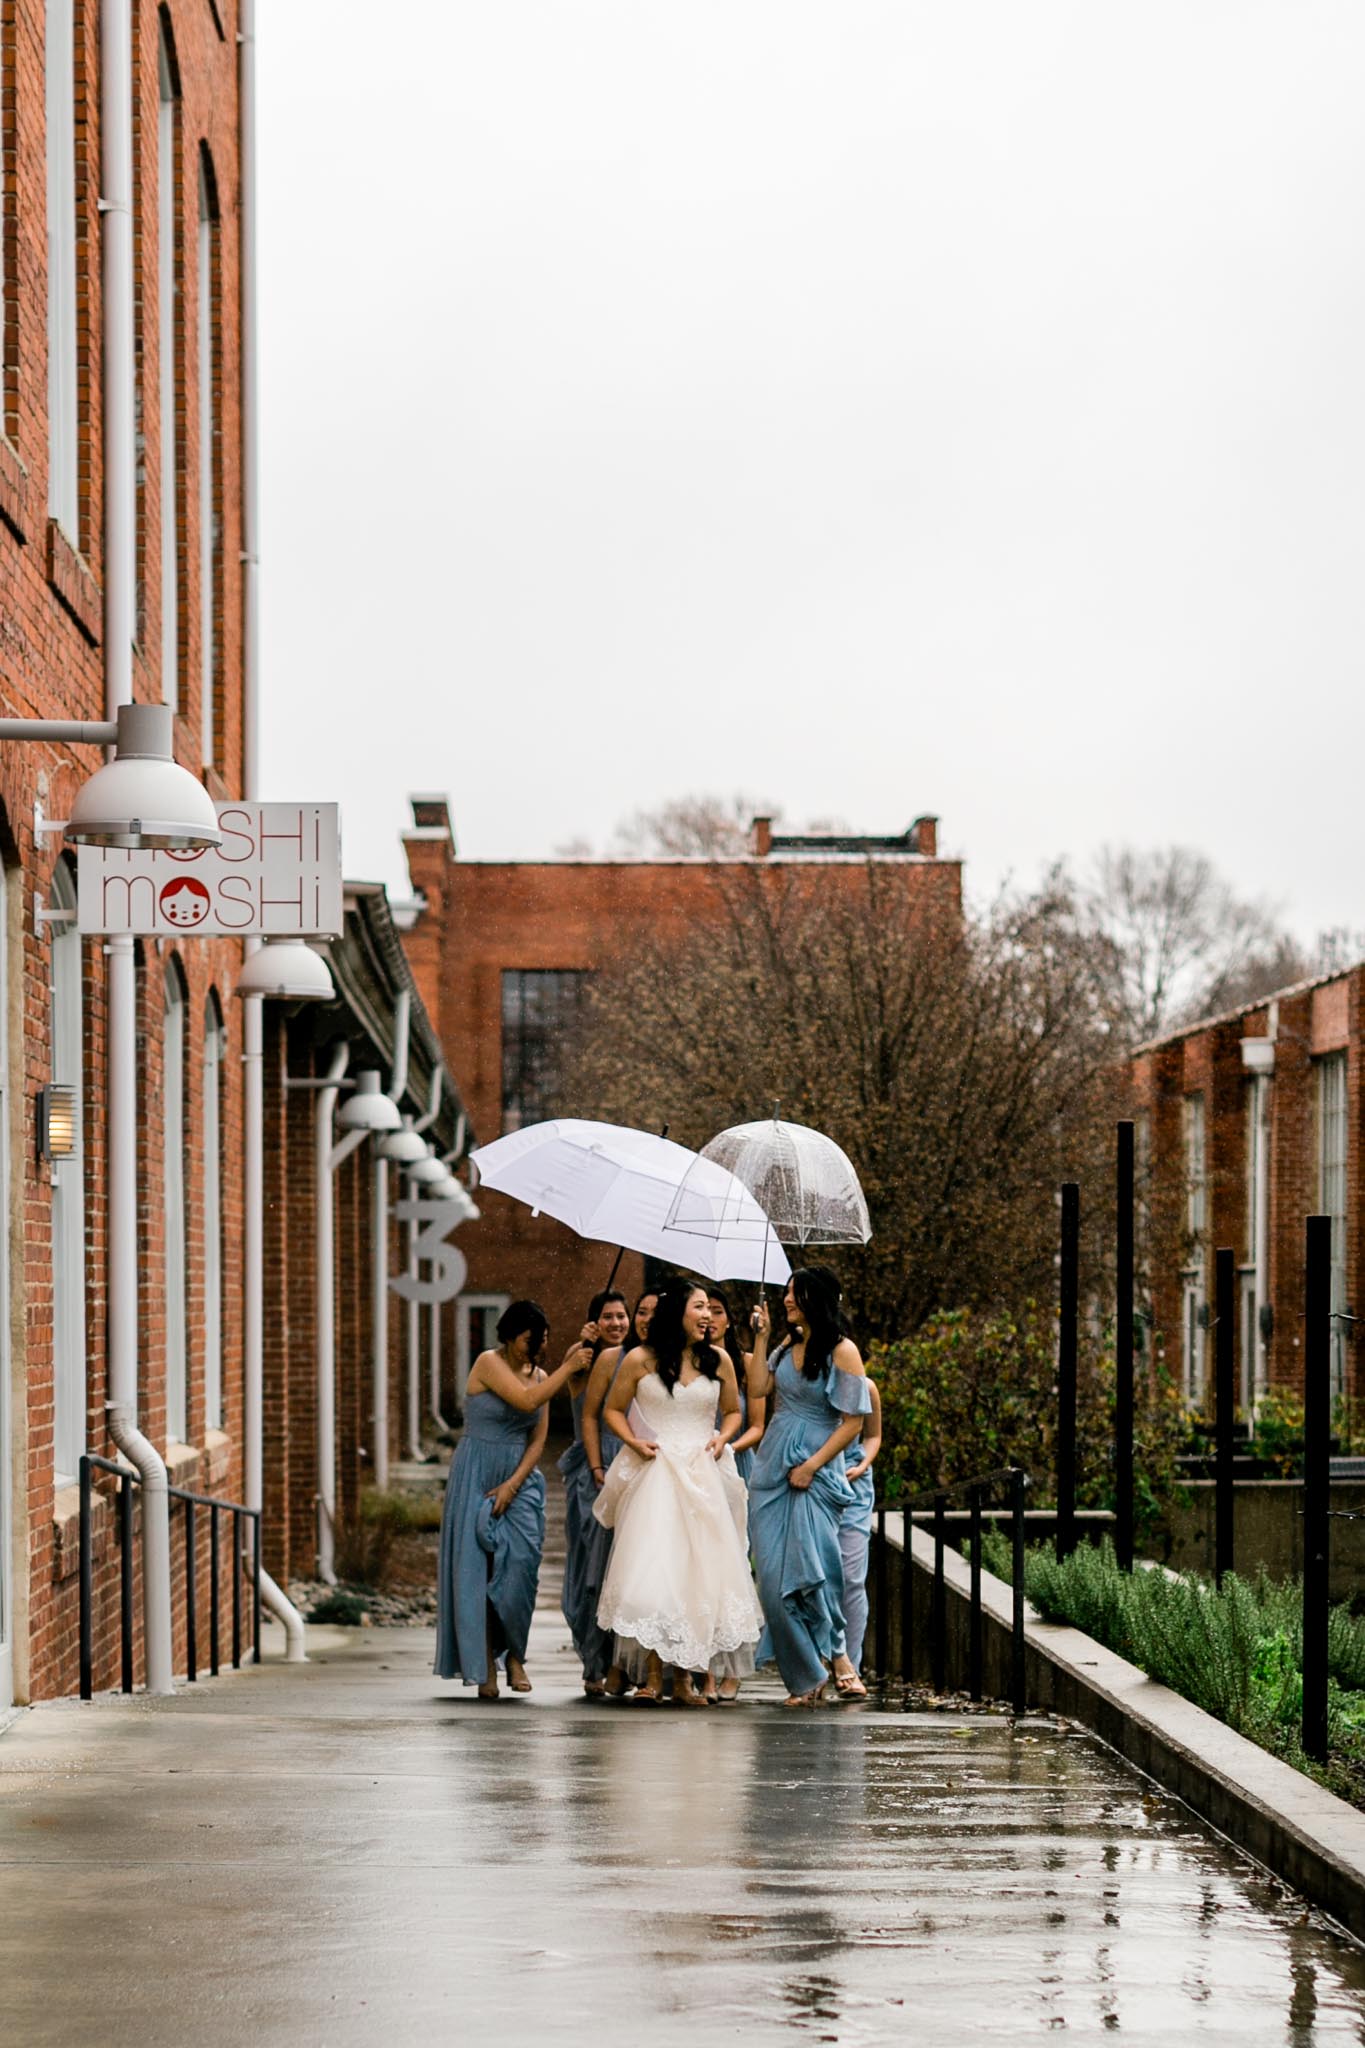 Bridal party walking in the rain at The Cotton Room | Durham Wedding Photographer | By G. Lin Photography